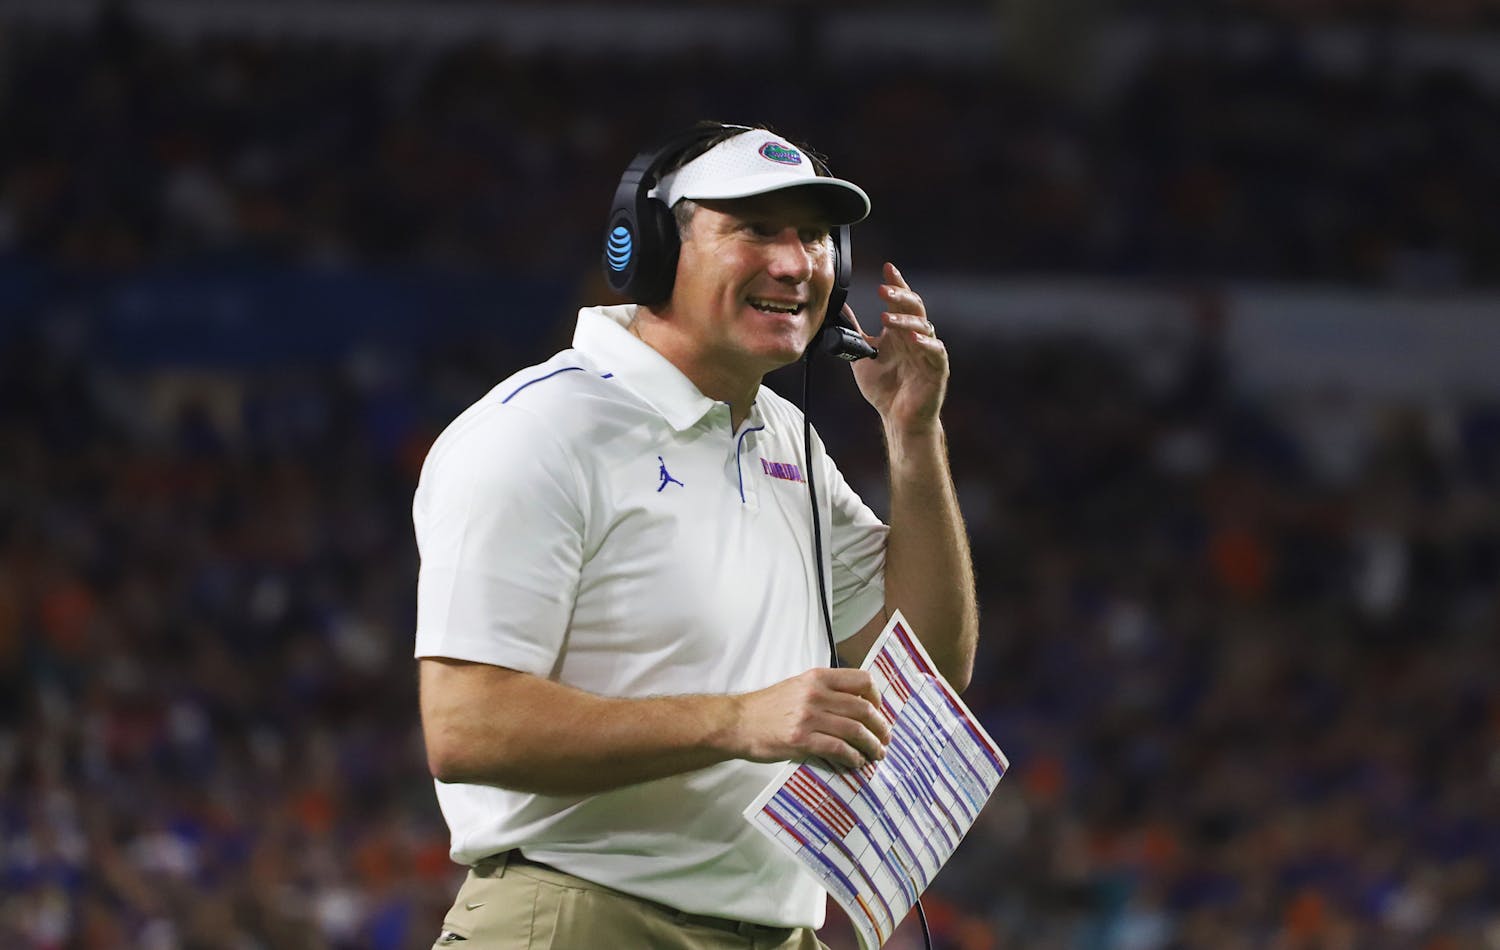 Florida football head coach Dan Mullen and the Gators will battle the UCF Knights three times over the next 12 years, according to a new deal reported Monday.